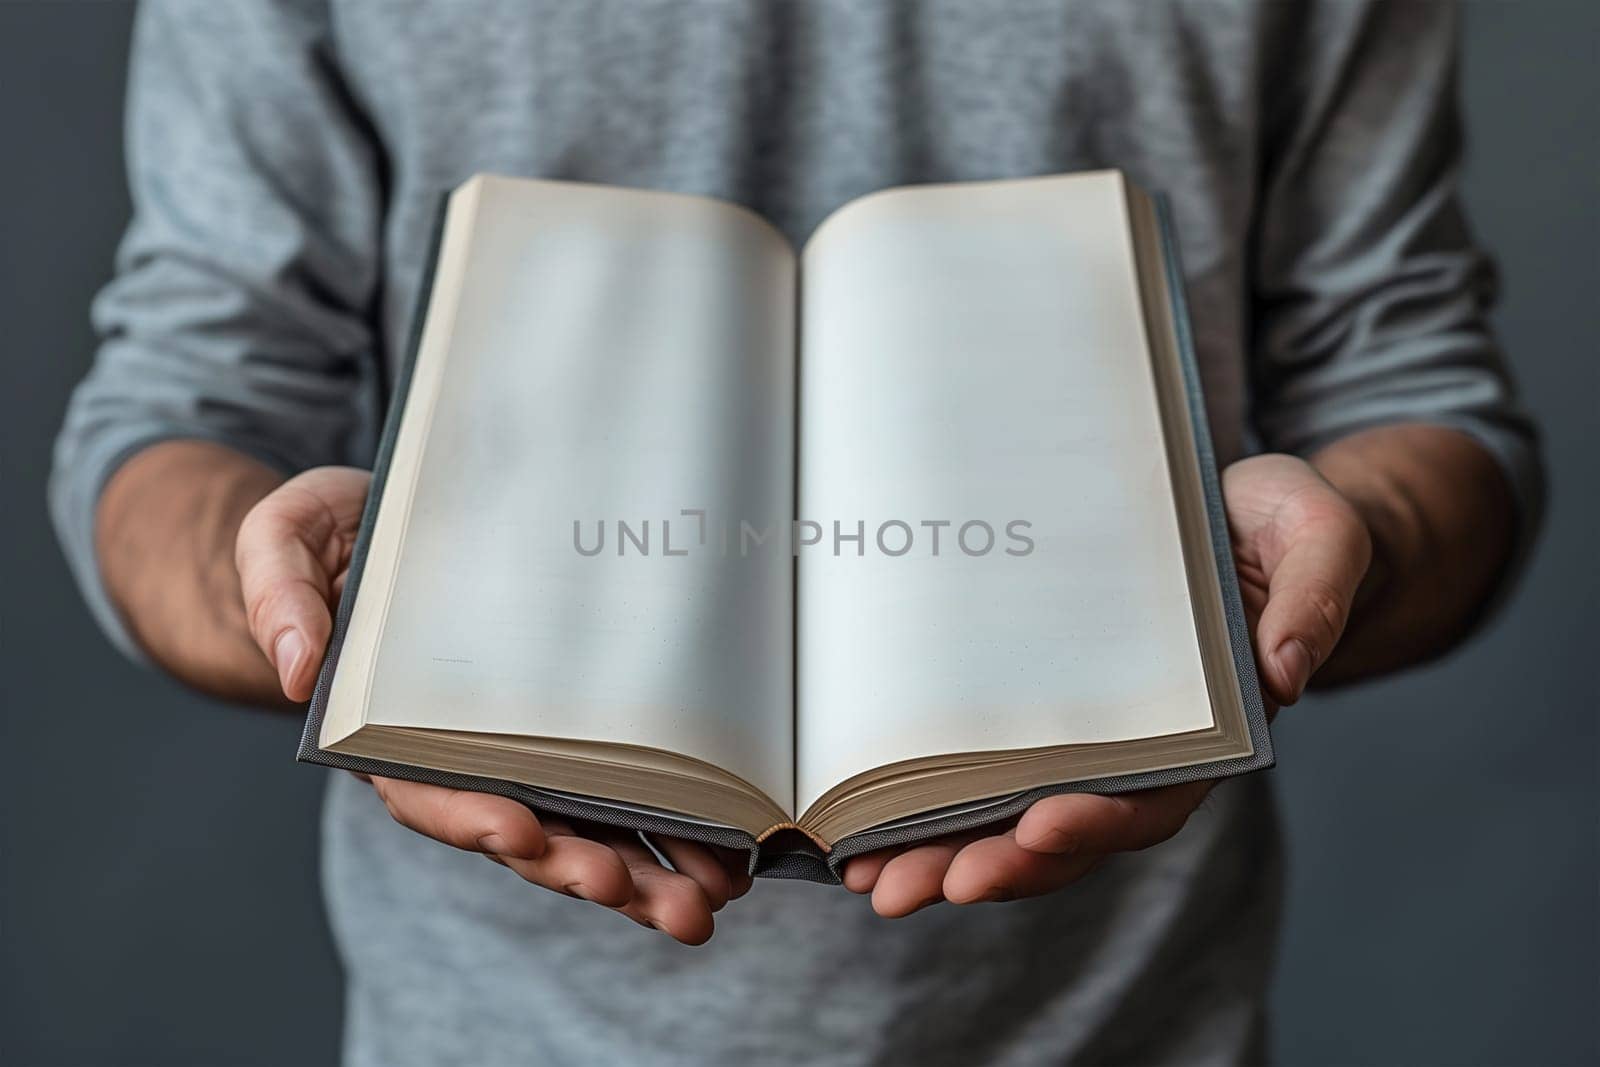 A man stands holding an open book in his hands, reading or studying intently. Mockup